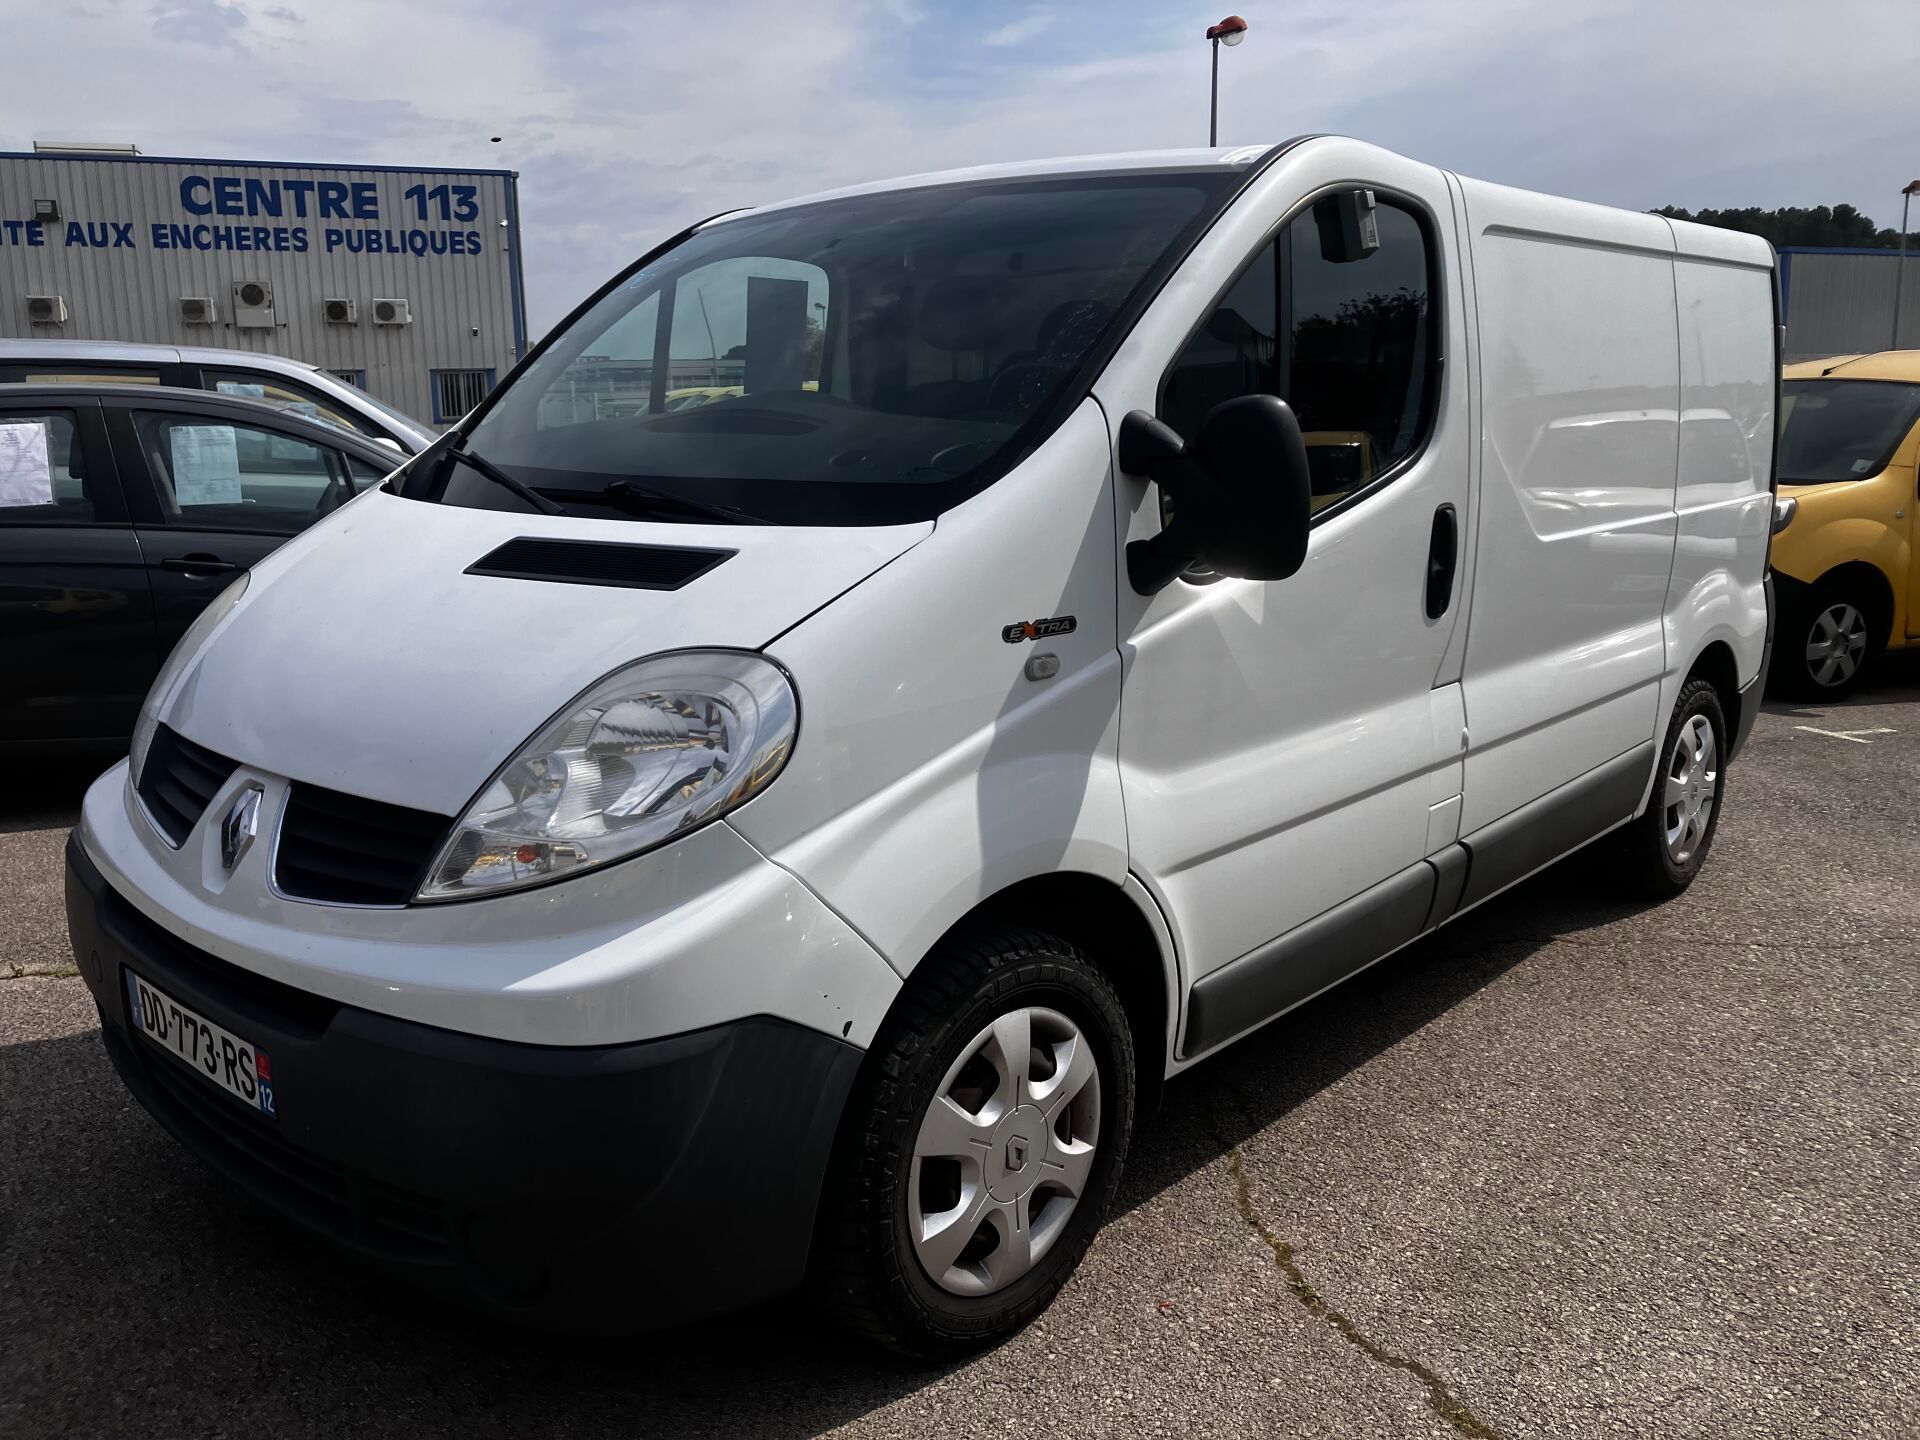 Null TRAFIC 2.0 DCI 90 HP
CTTE RENAULT TRAFIC 2.0 DCI 90 HP 2.0 DCI
Body : FOURG&hellip;